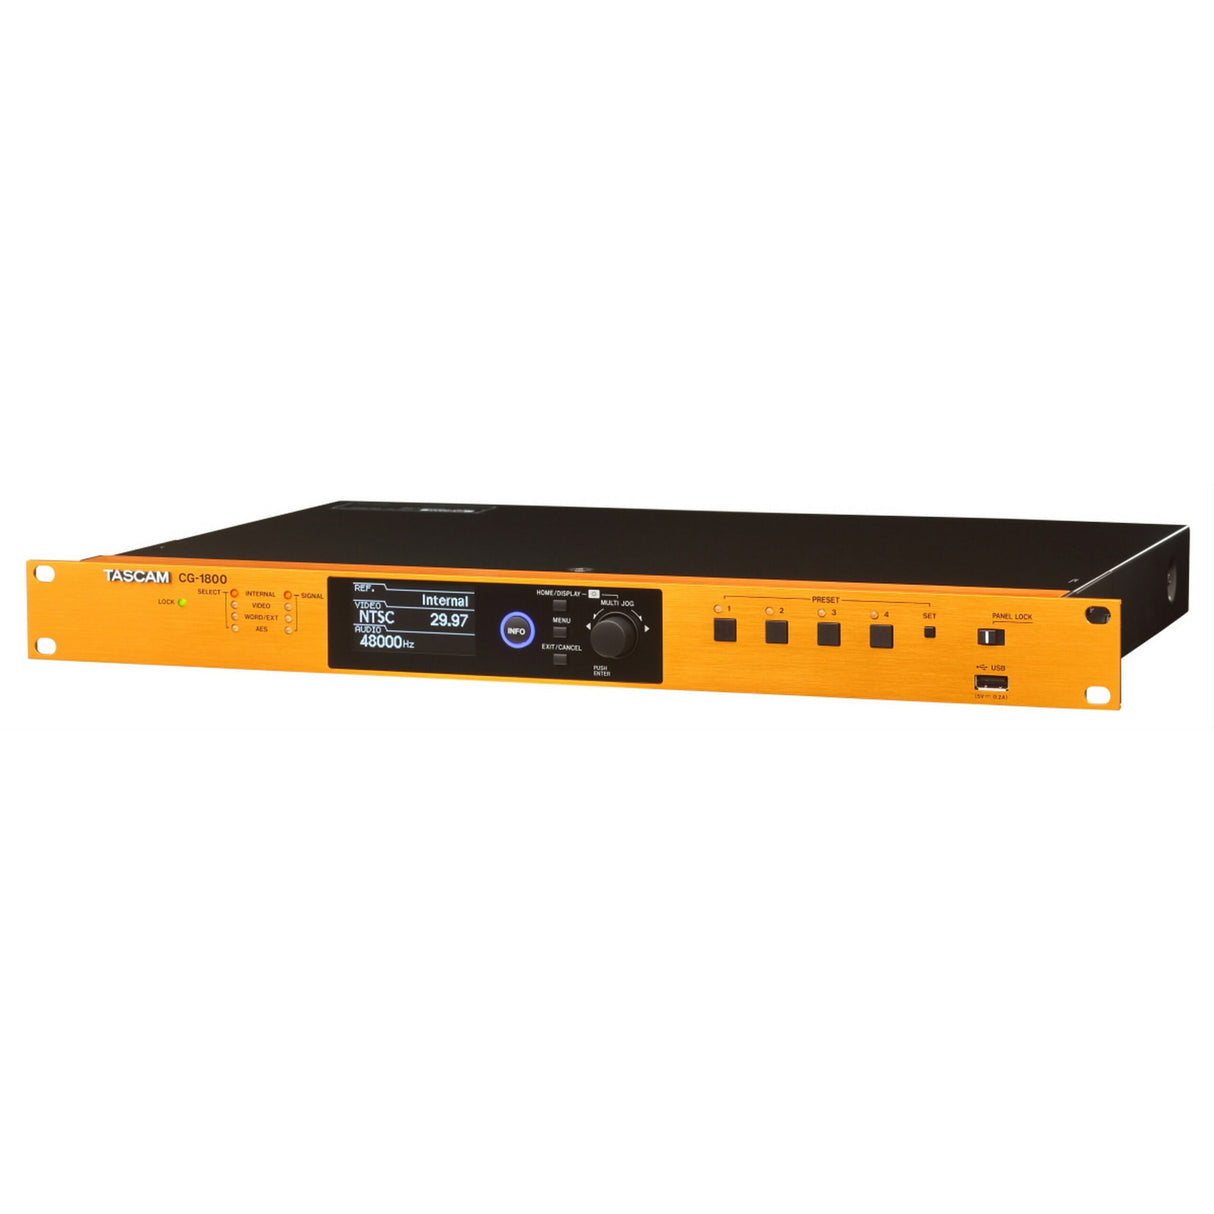 Tascam CG-1800 Master Clock Generator for Small to Large-Scale Video/Audio Synchronization Systems